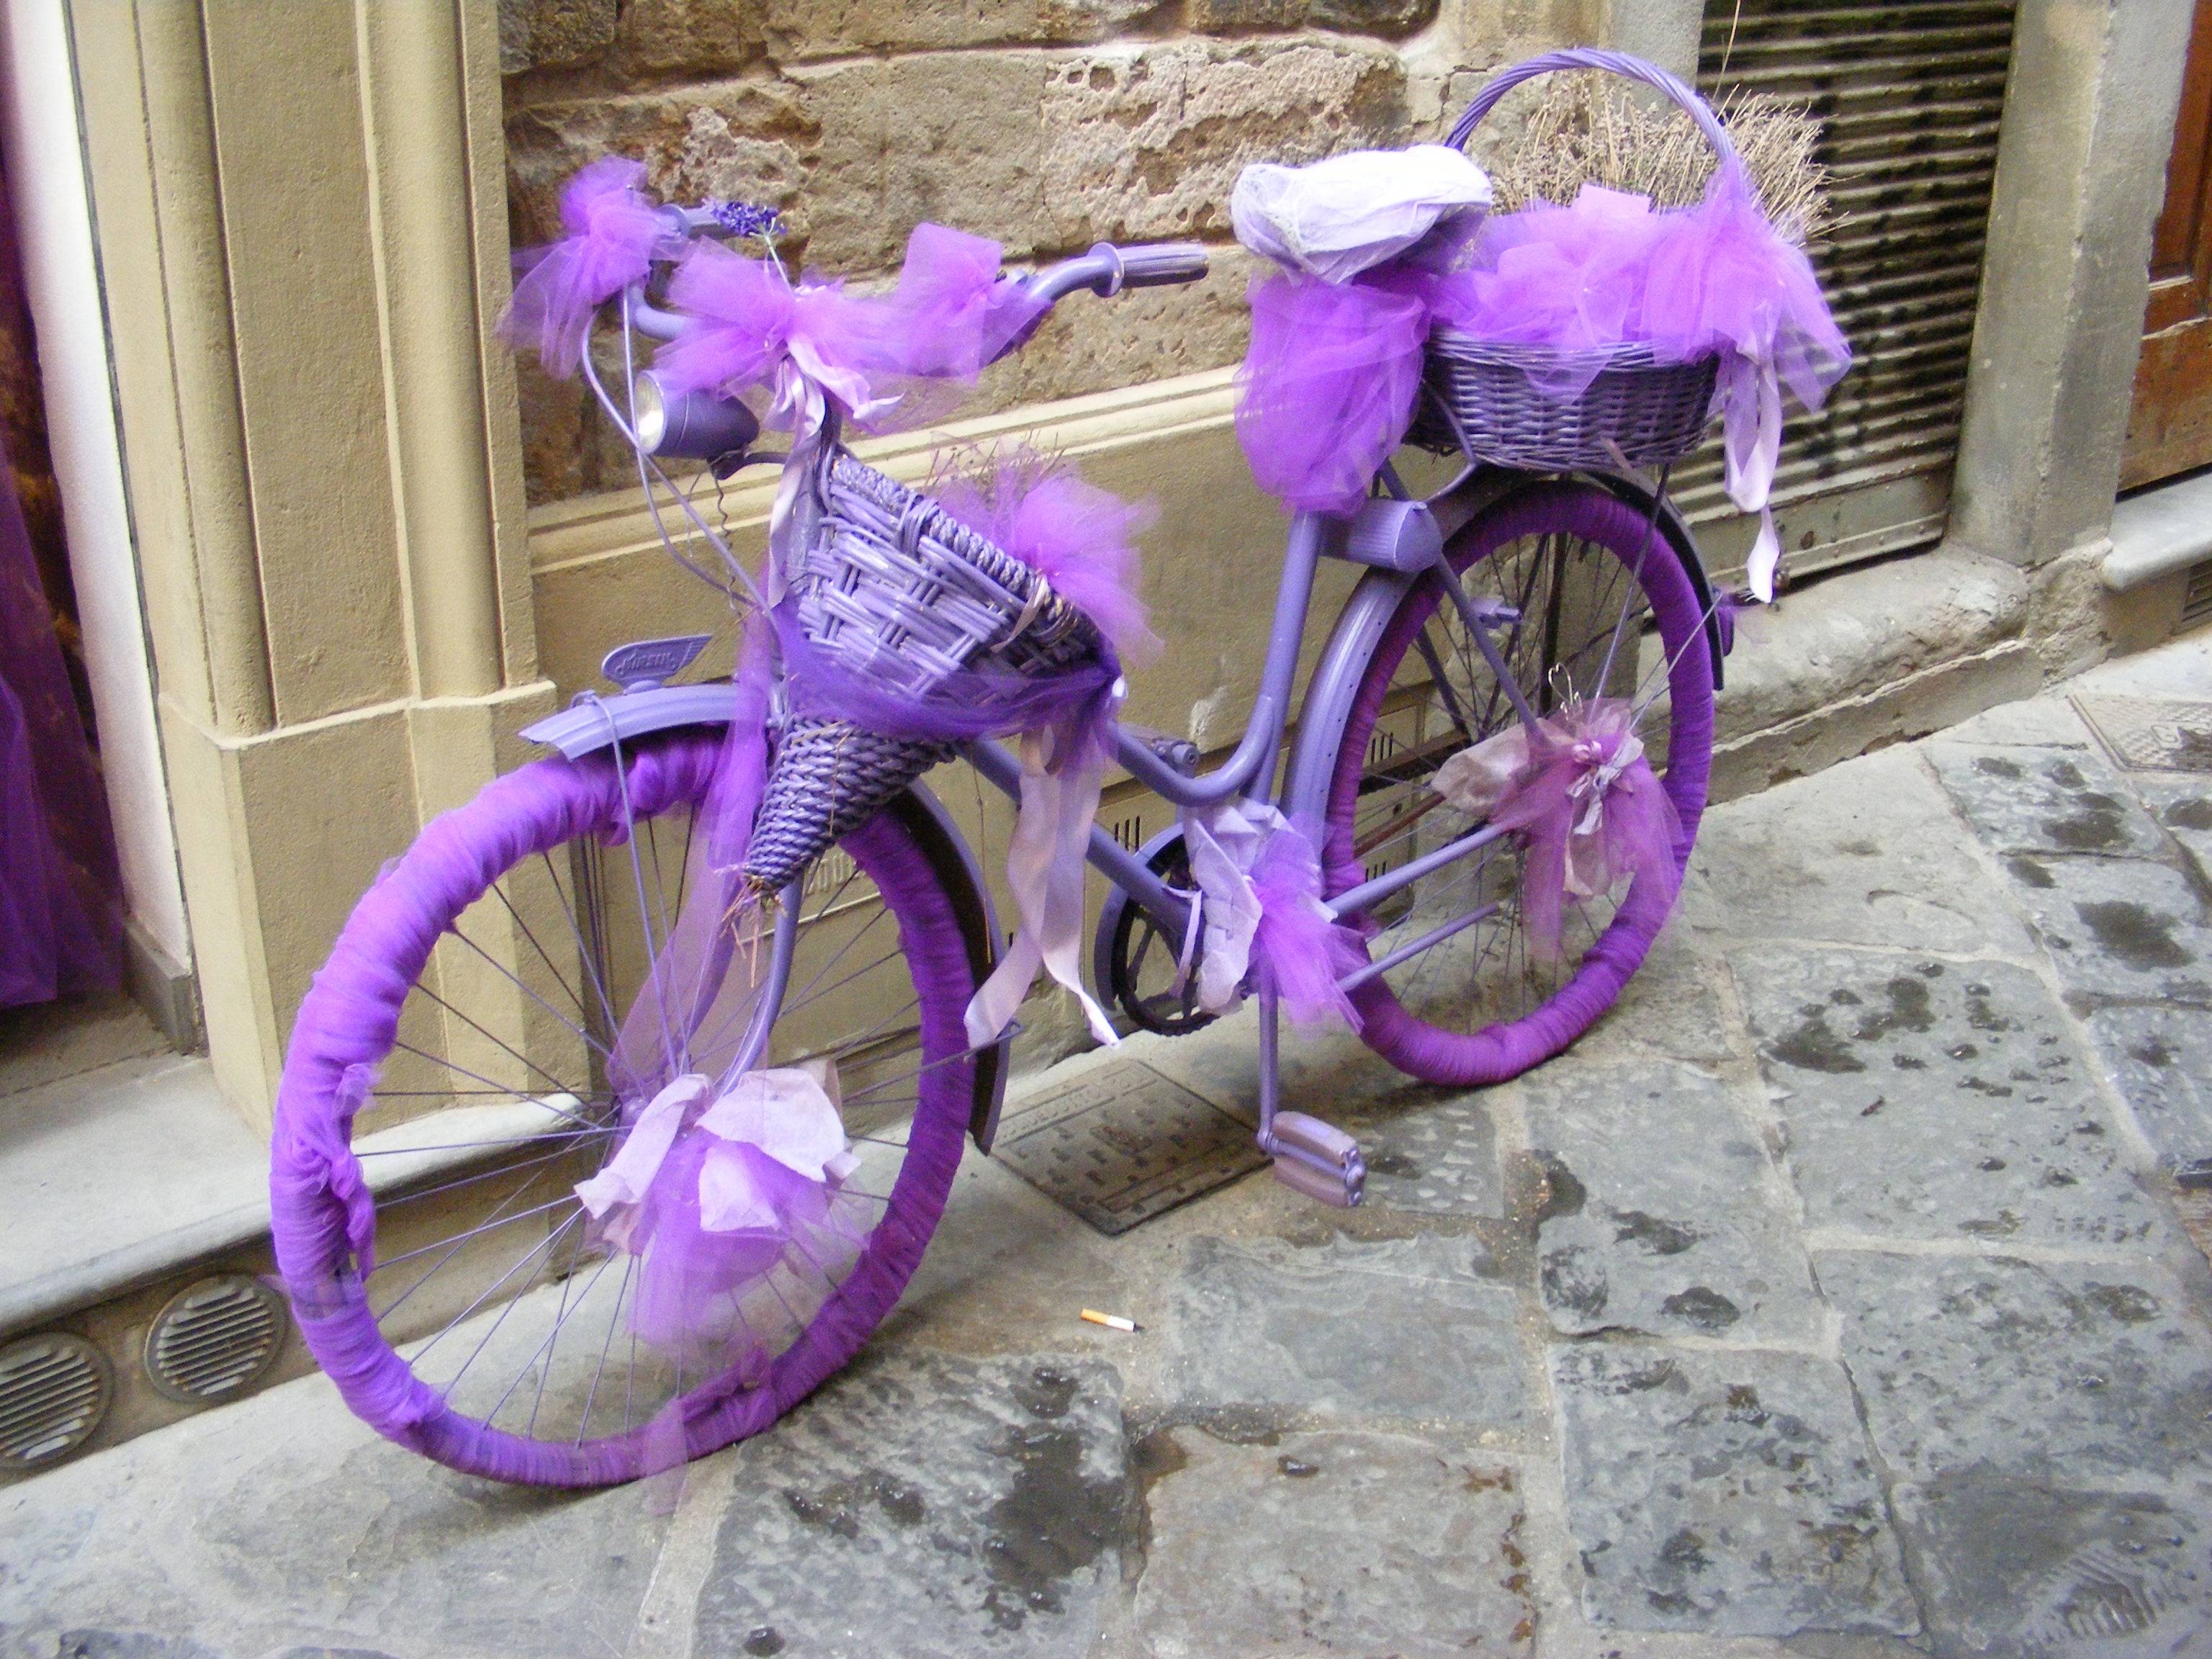 Violet bicycle in Florence - advertisement for a lavender shop